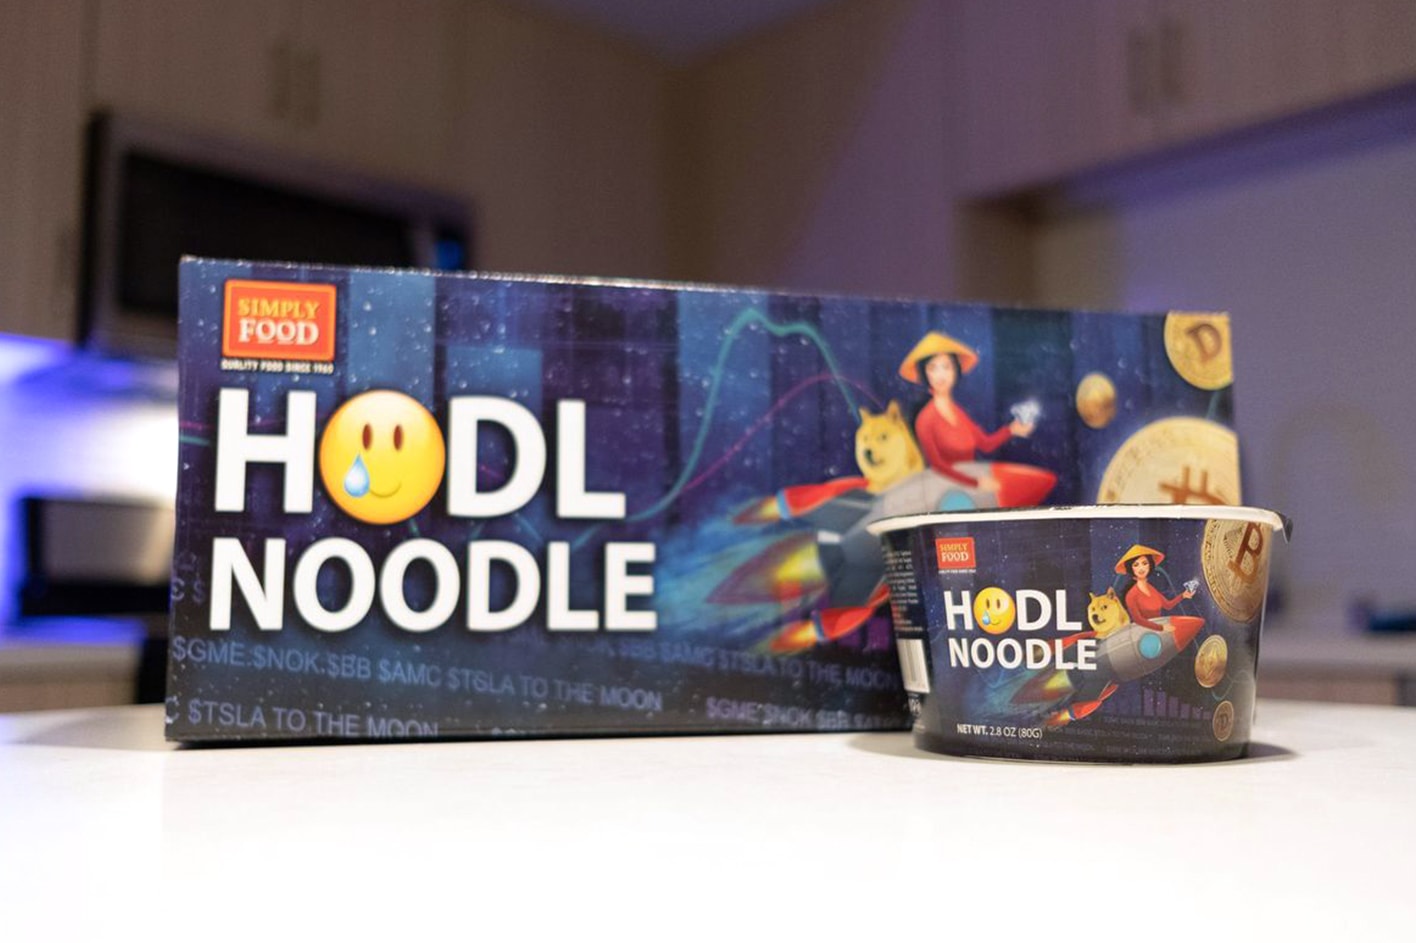 Simply Food HODL NOODLE LIMITED EDITION instant ramen safemoon doge coin instant noodles Binh Tay Food Company cryptocurrency humor 